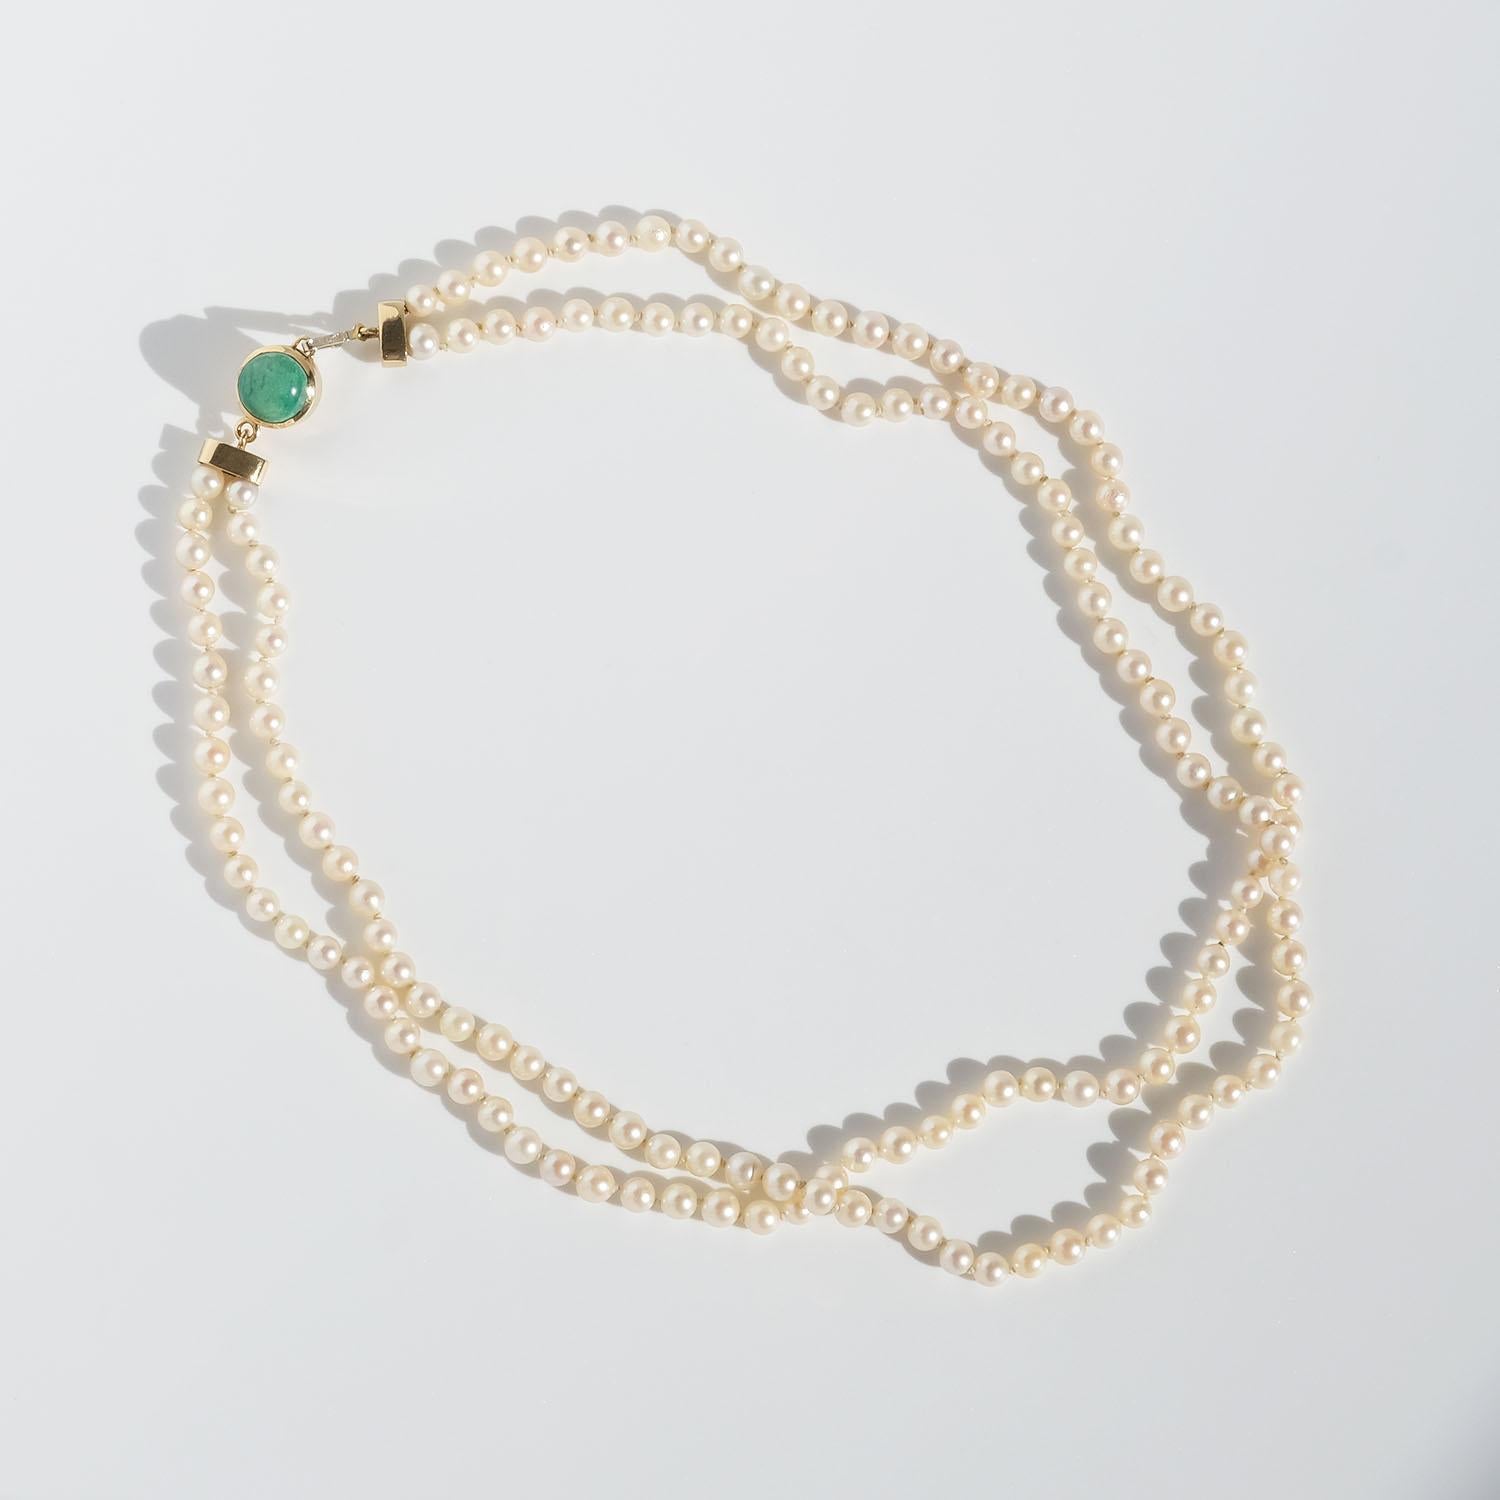 Double Strand Pearl Necklace with a 18k Gold Lock In Good Condition For Sale In Stockholm, SE